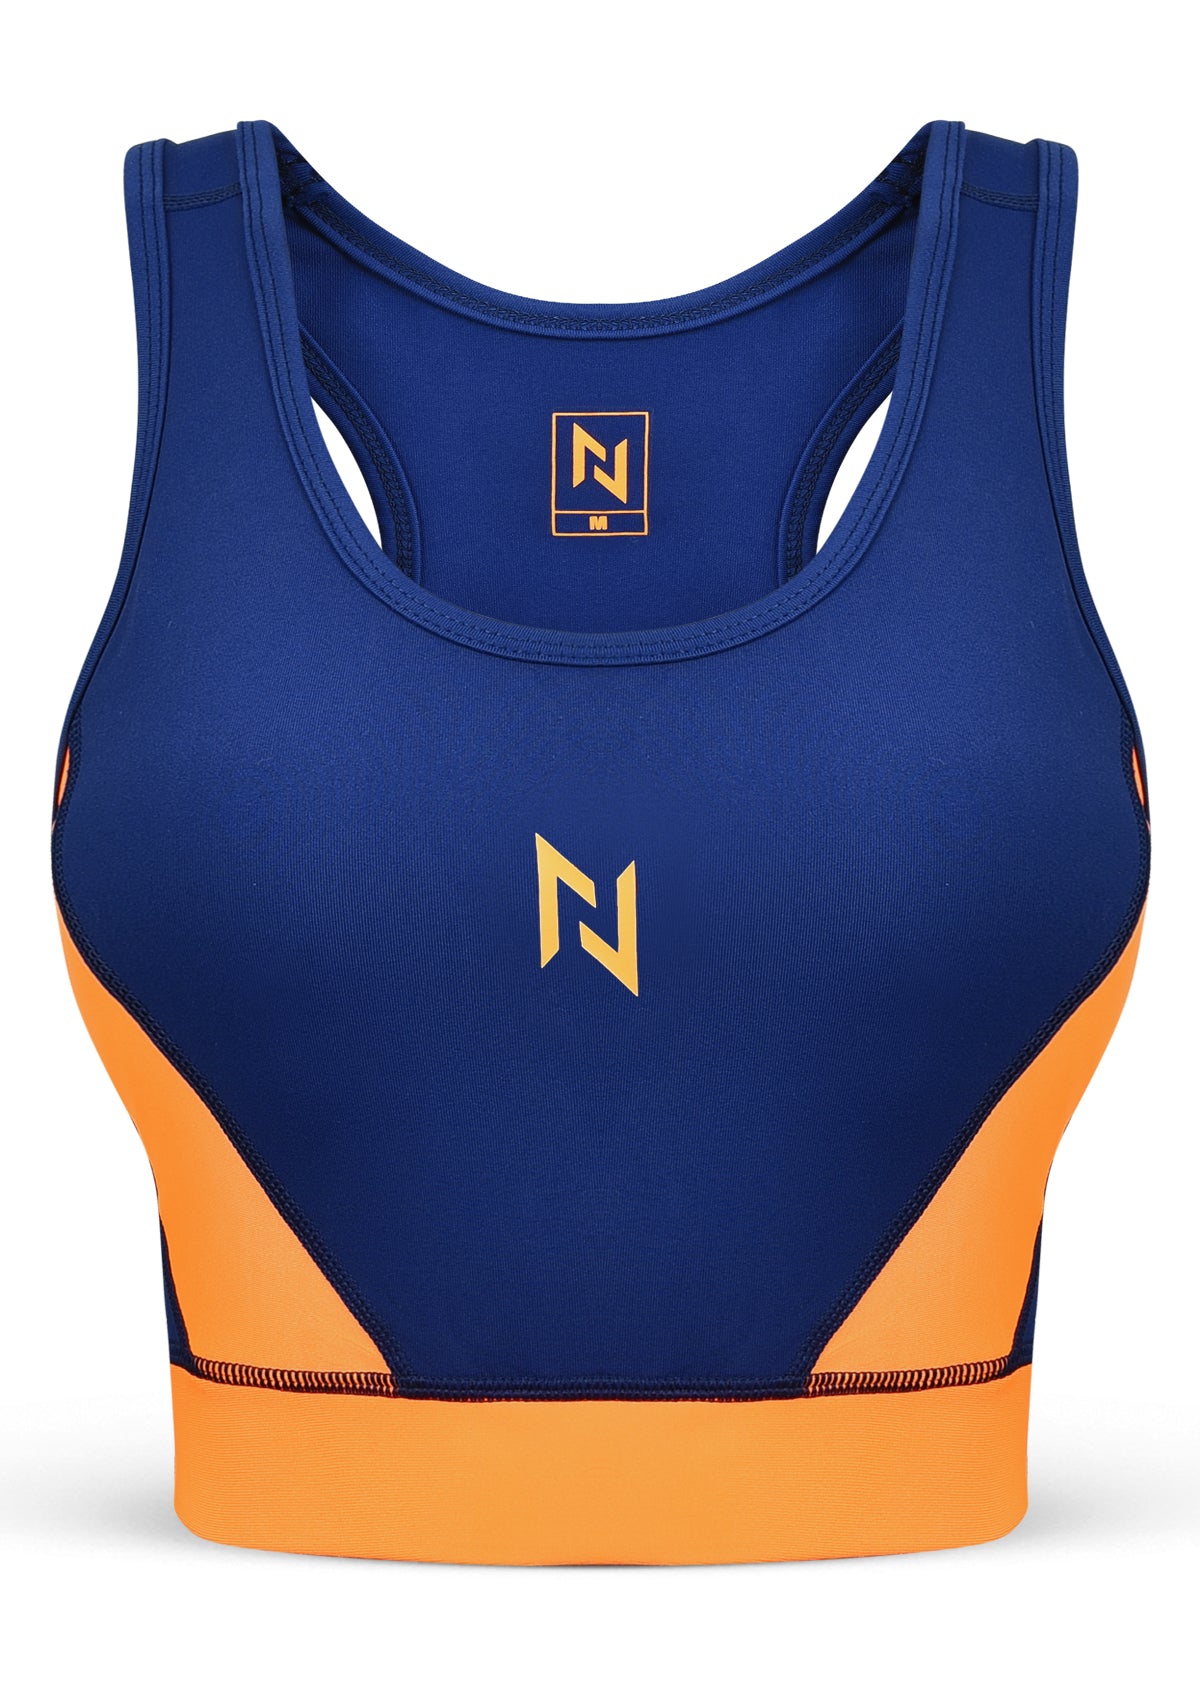 NAVY HIGH SUPPORT SPORTS BRA - Nomad Apparel